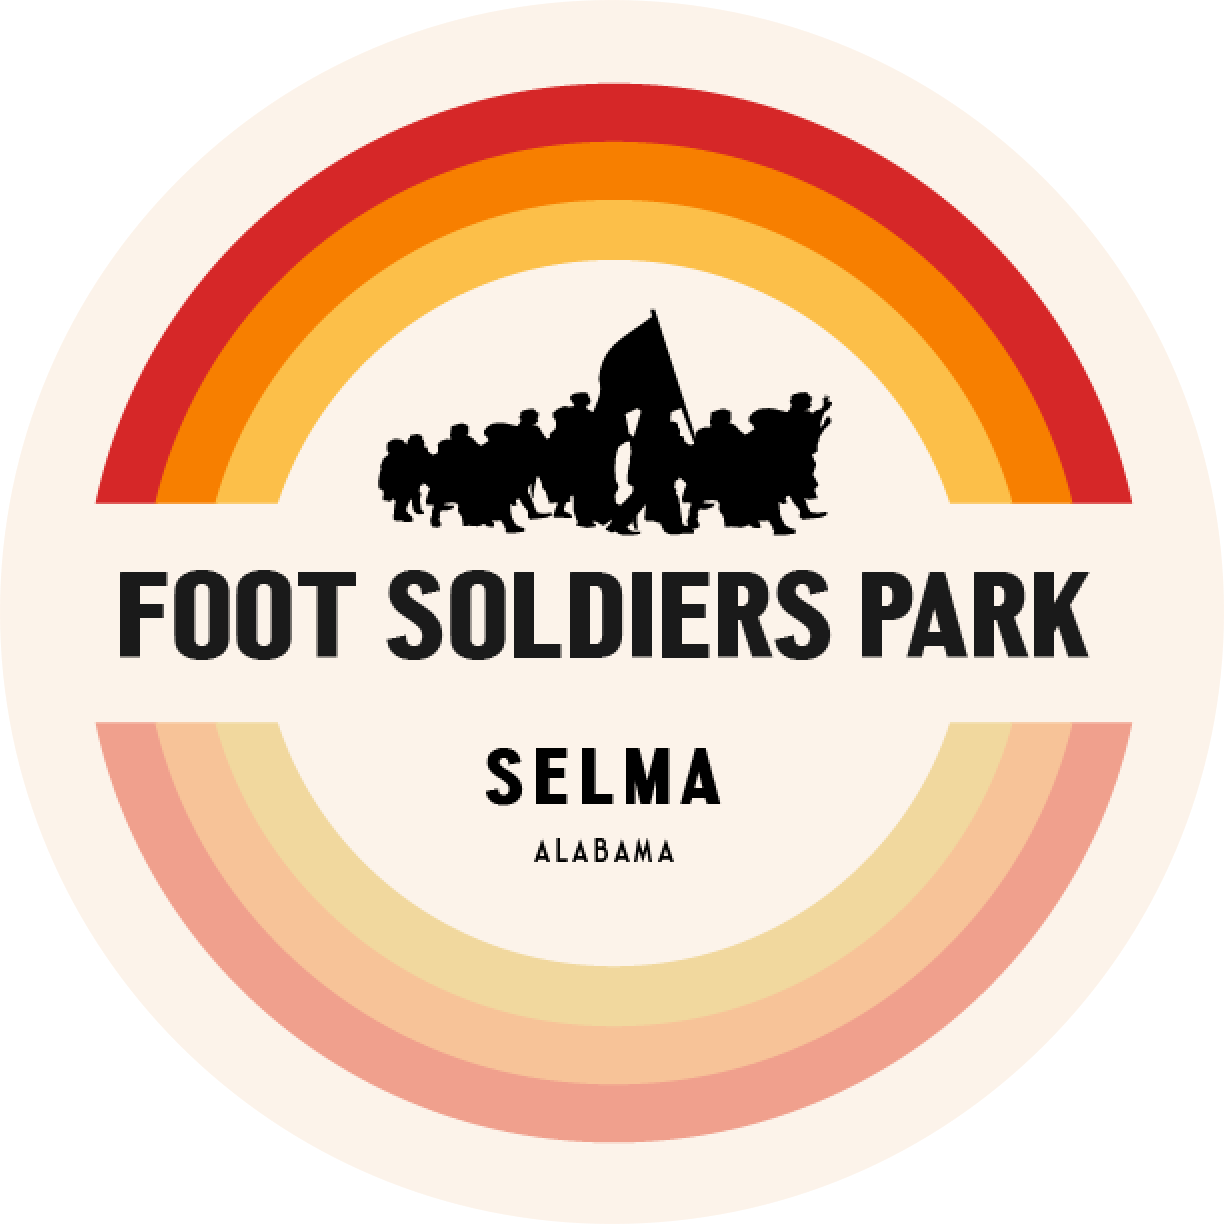 Foot Soldiers Park logo